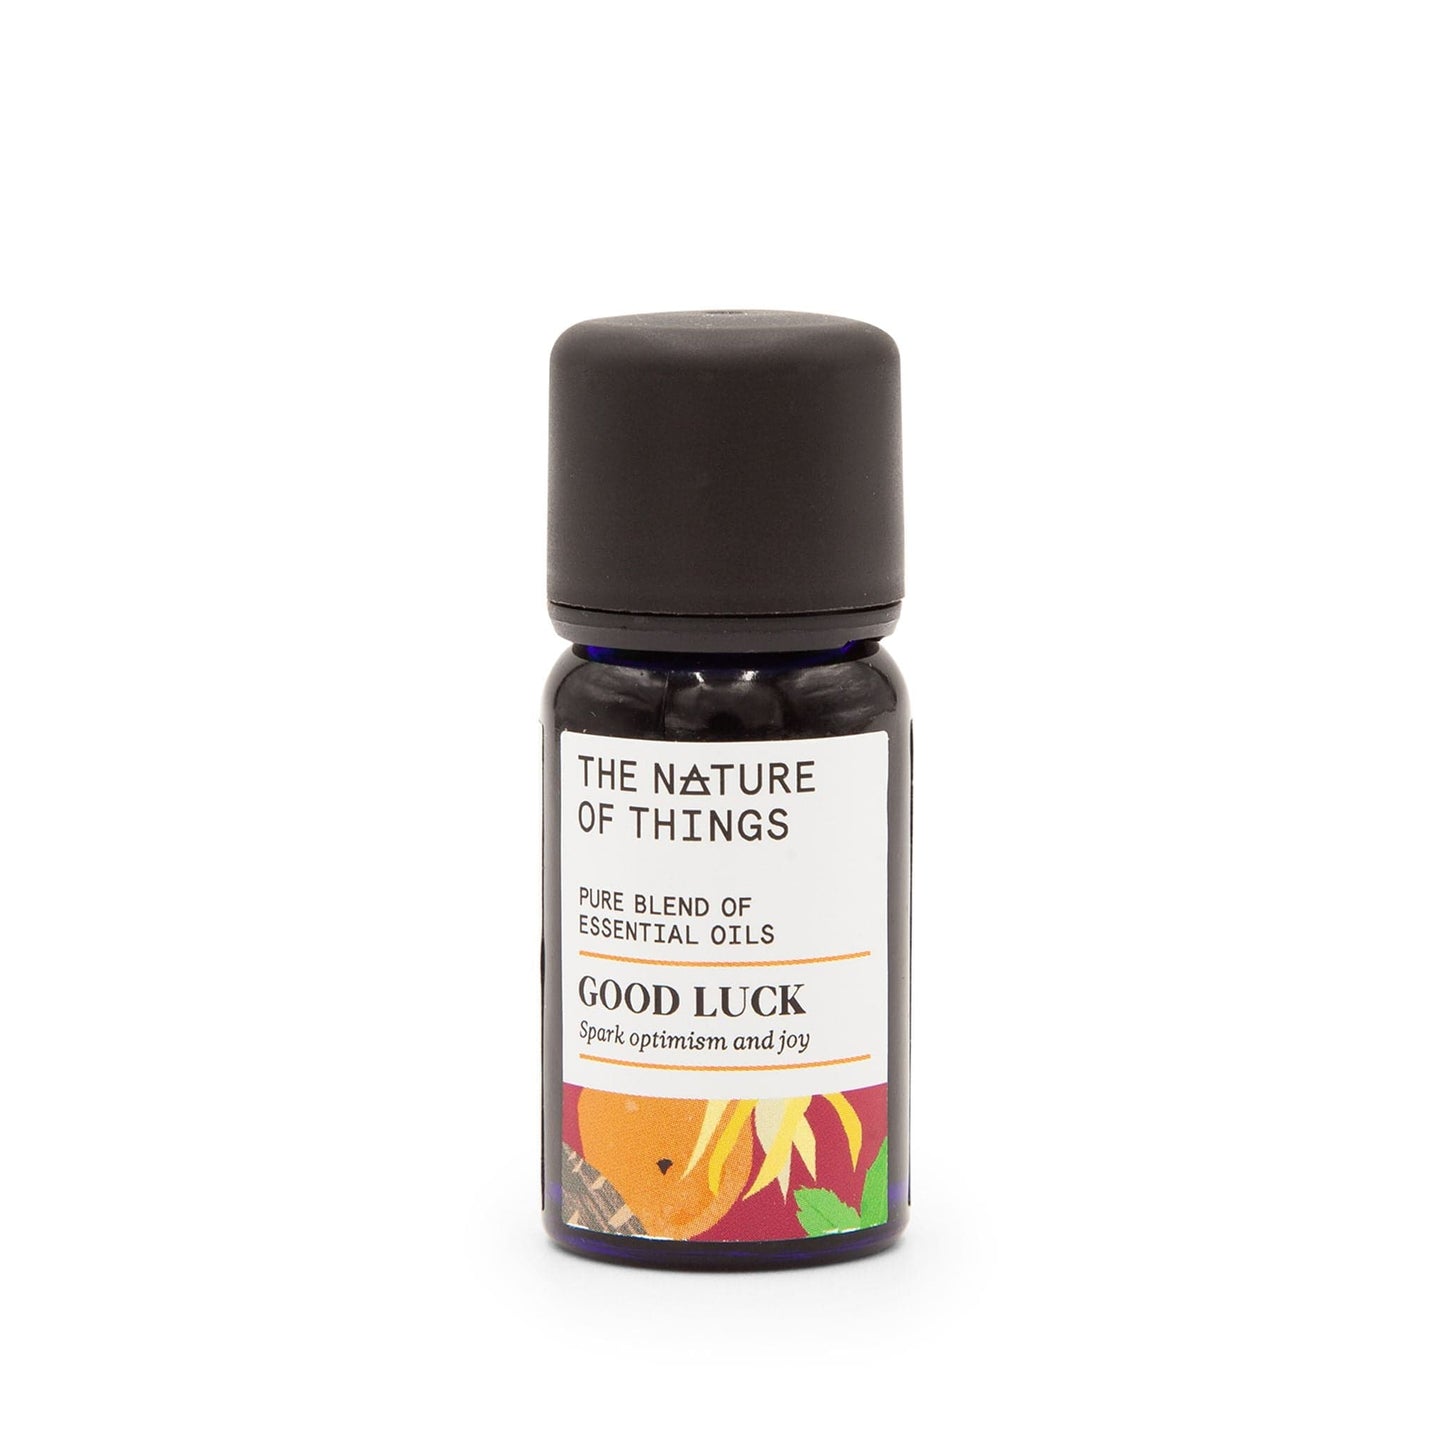 The Nature of Things Essential Oil Good Luck Essential Oil Blend 12ml - The Nature of Things